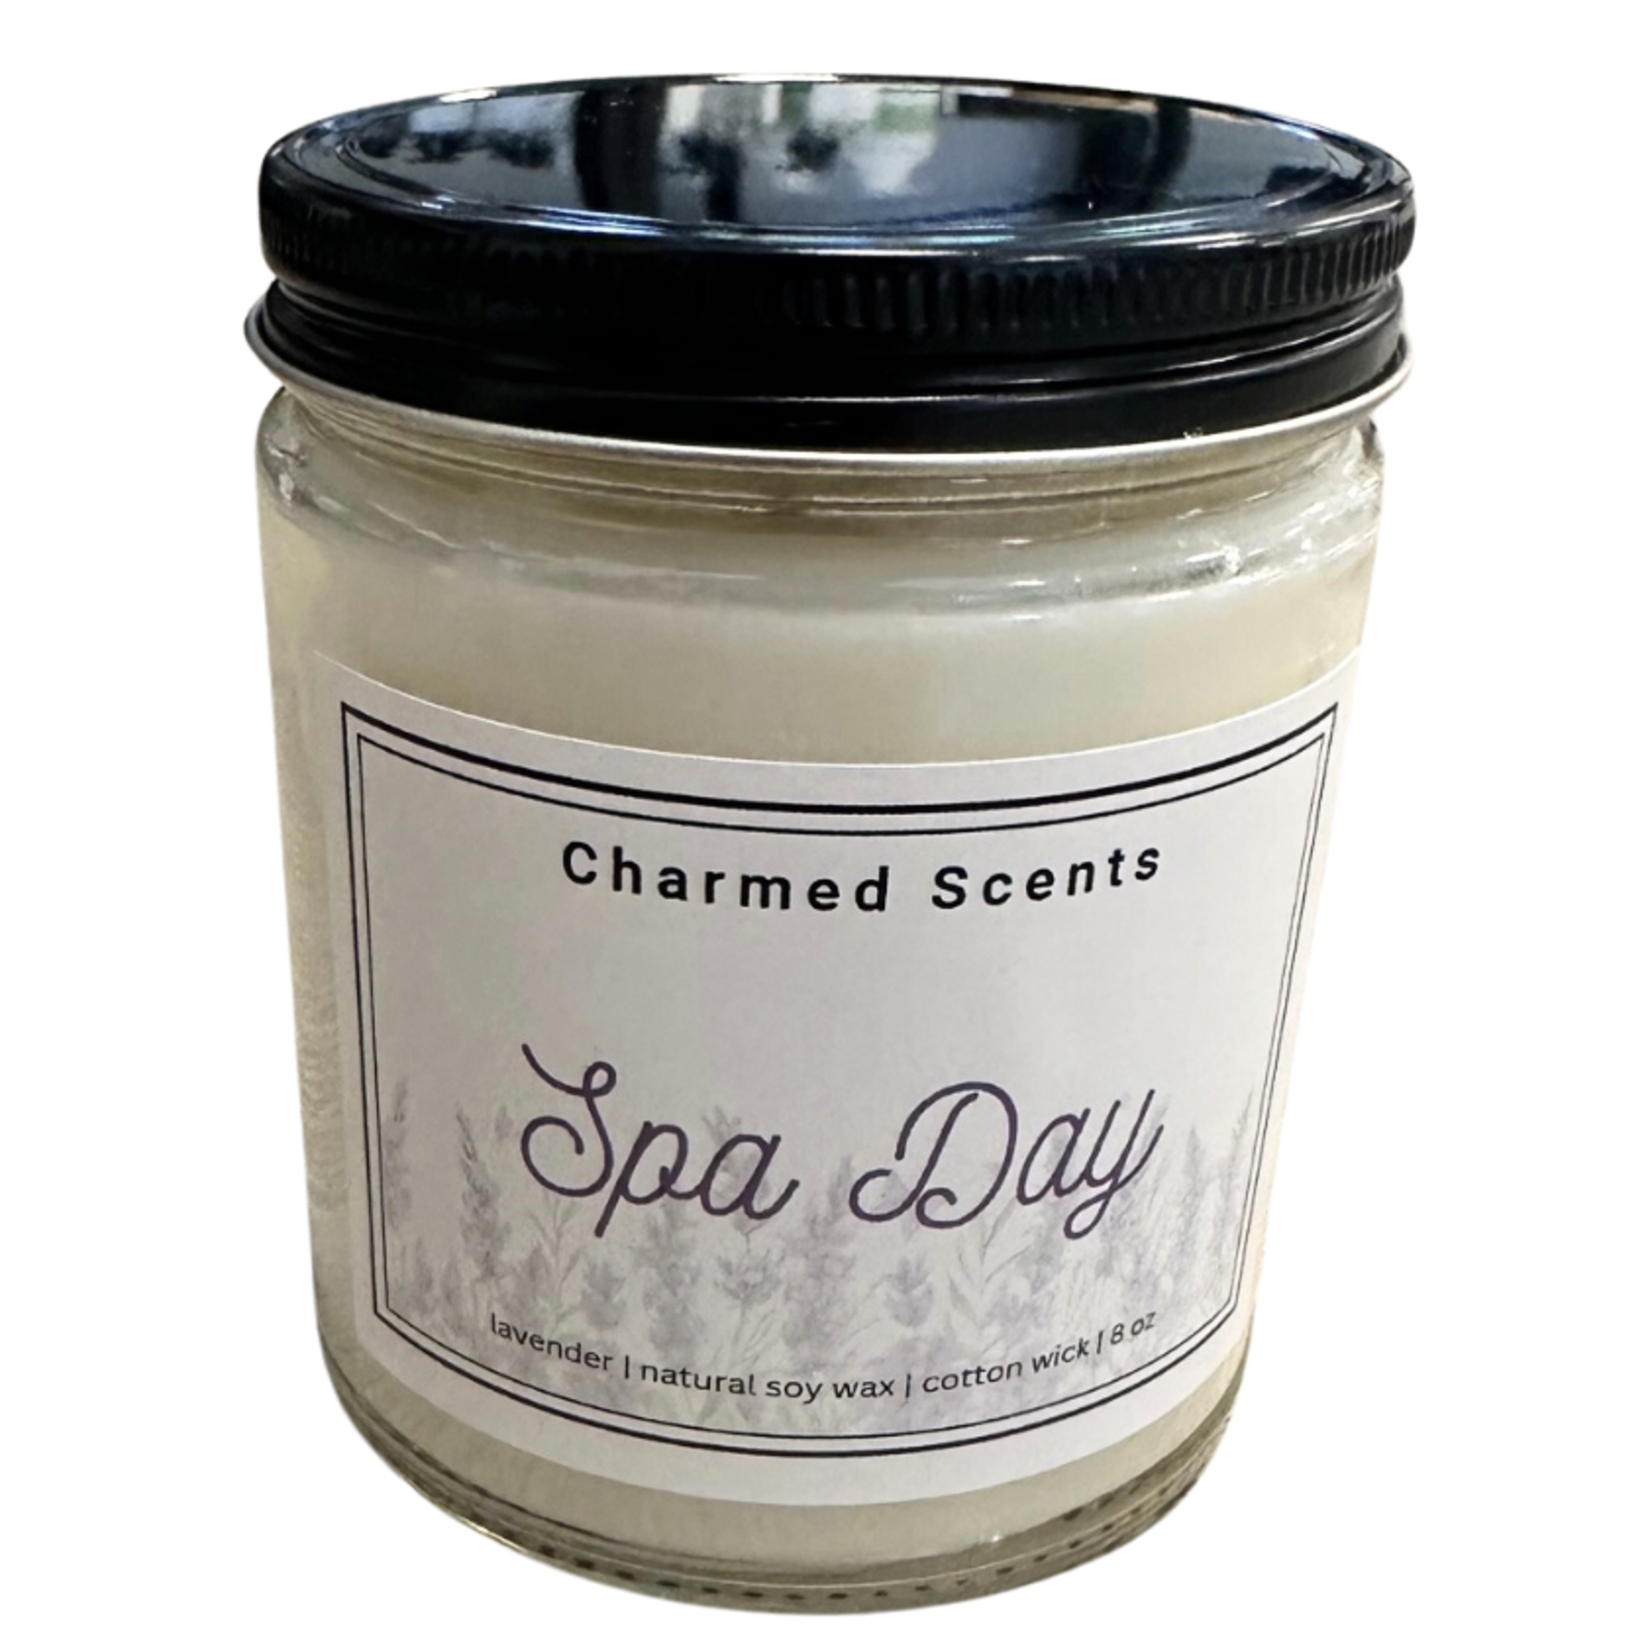 Charmed Scents - 8 oz Soy Candle - Spa Day